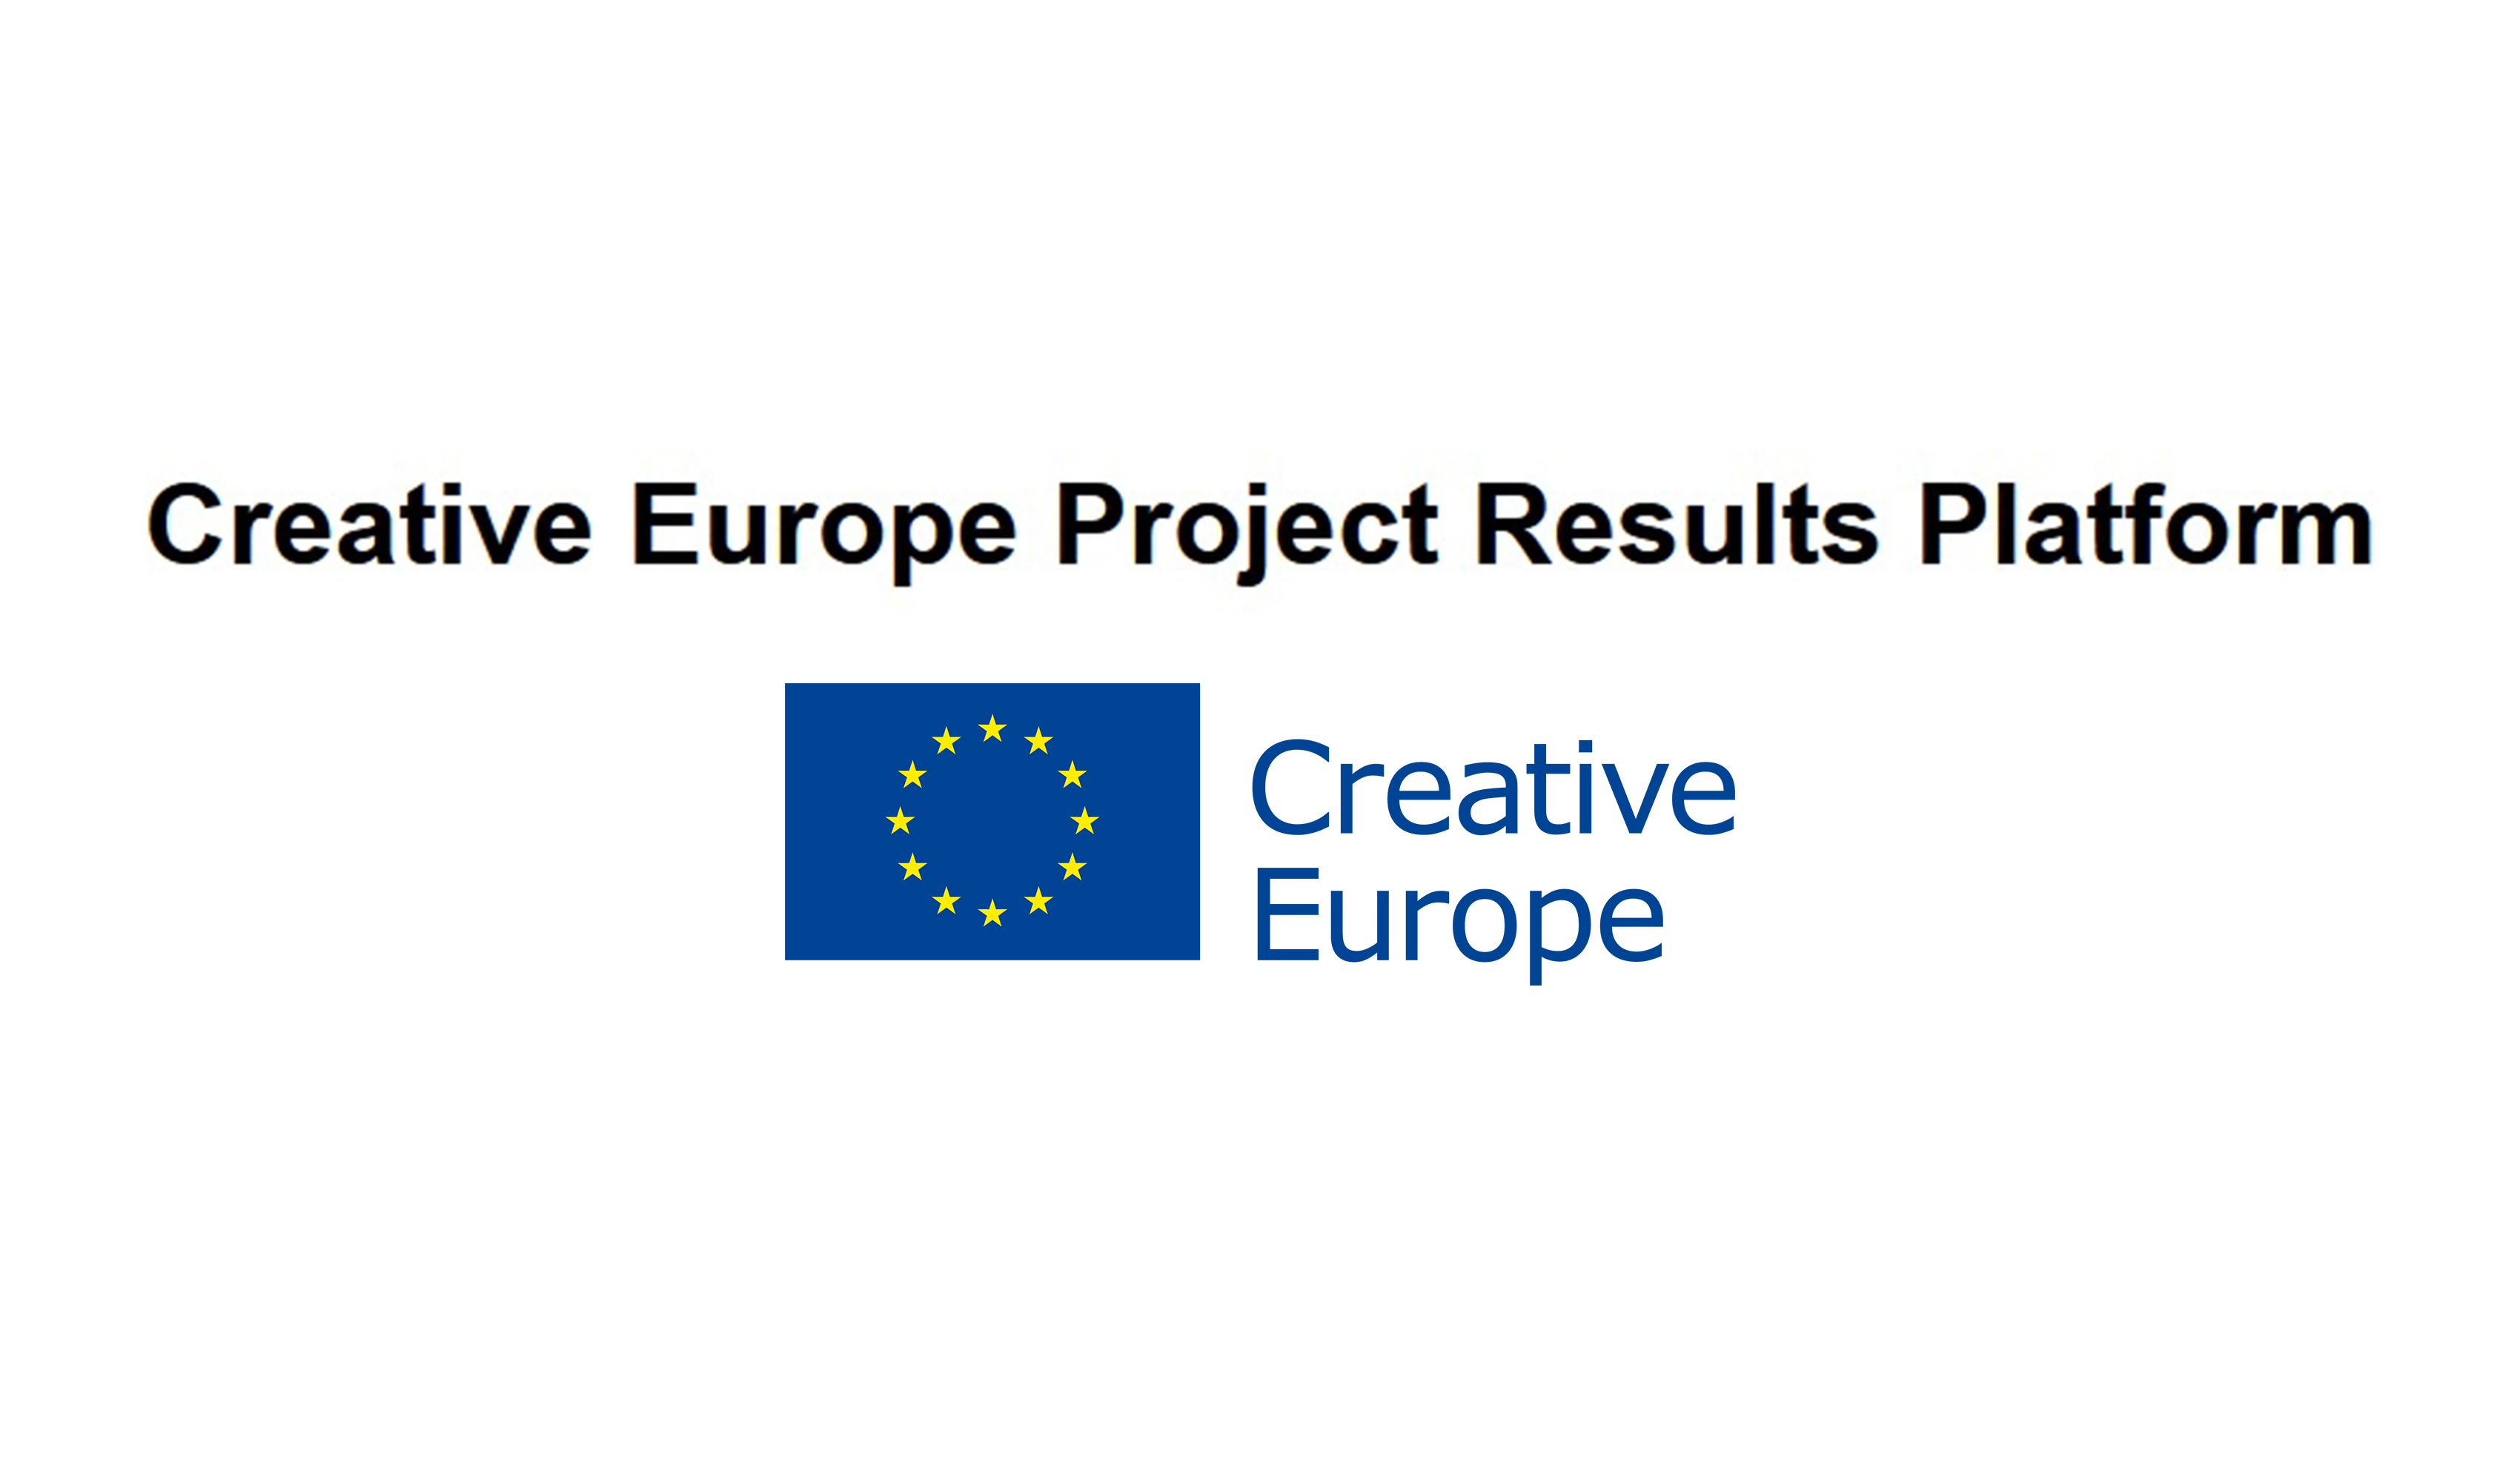 CREATIVE EUROPE PROJECT RESULTS PLATFORM